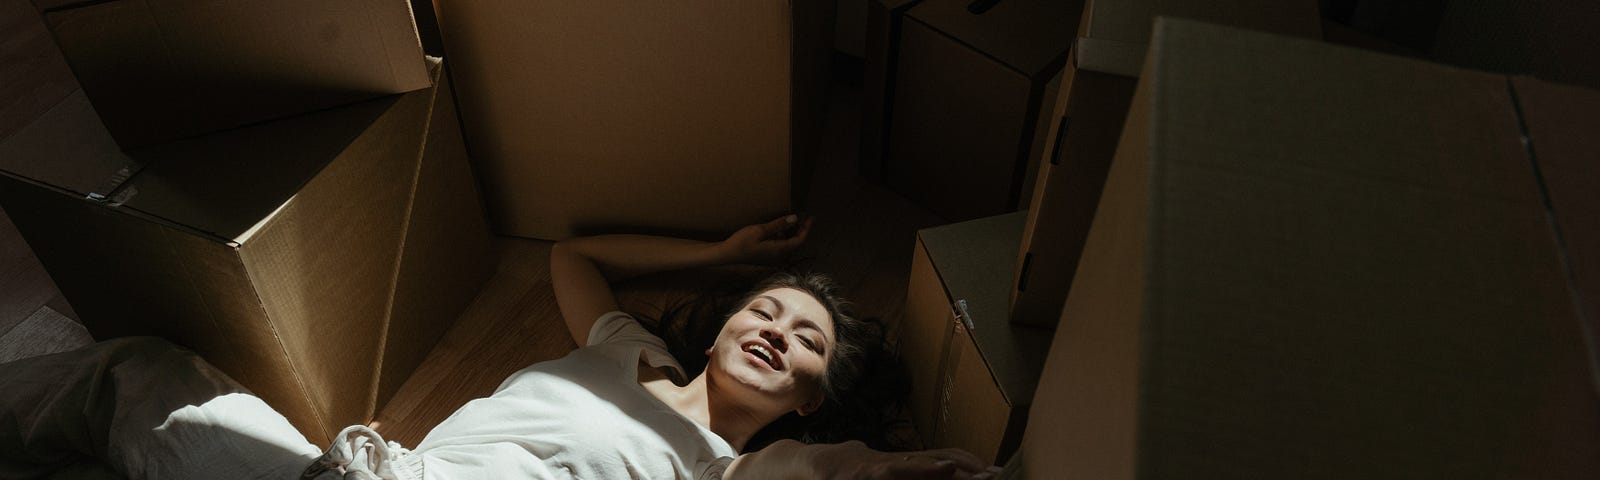 A woman lies blissfully among cardboard boxes.